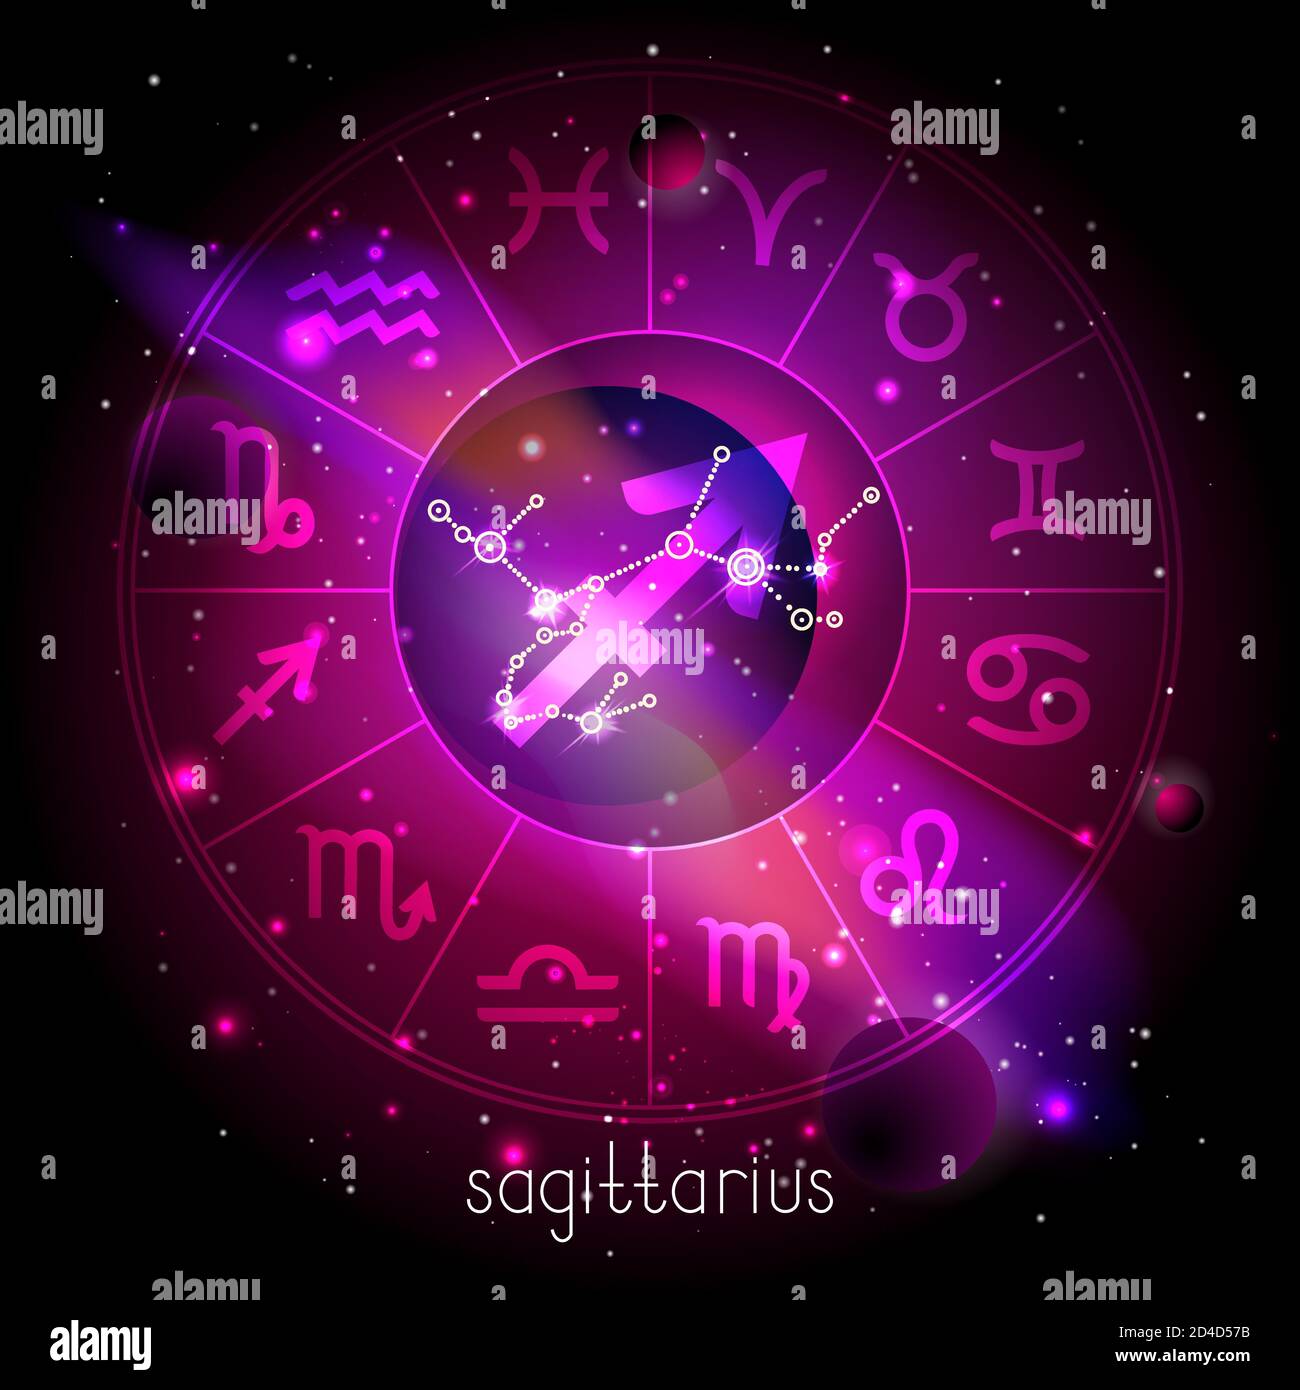 Vector illustration of sign and constellation SAGITTARIUS with Horoscope circle against the space background with planets and stars. Sacred symbols in Stock Vector